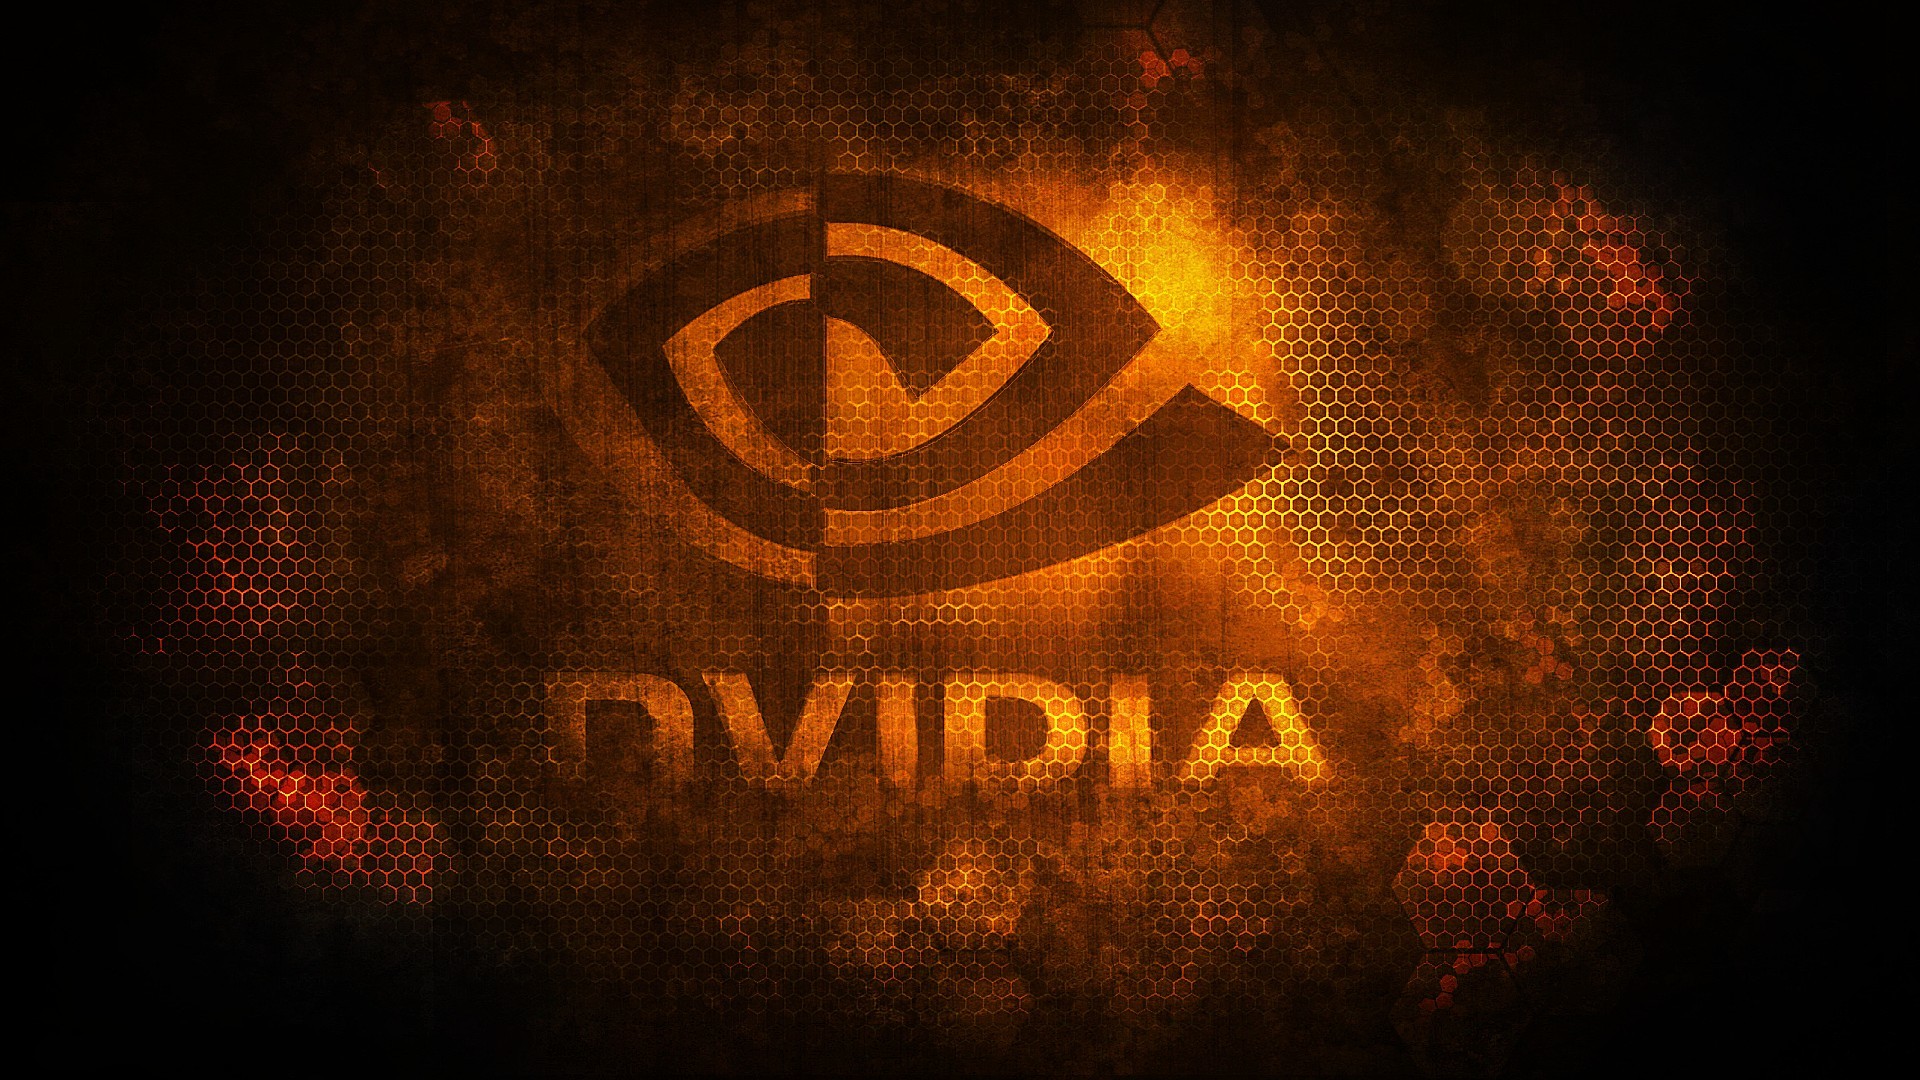 1920x1080 Nvidia logo for desktop background hd | Daily pics update .